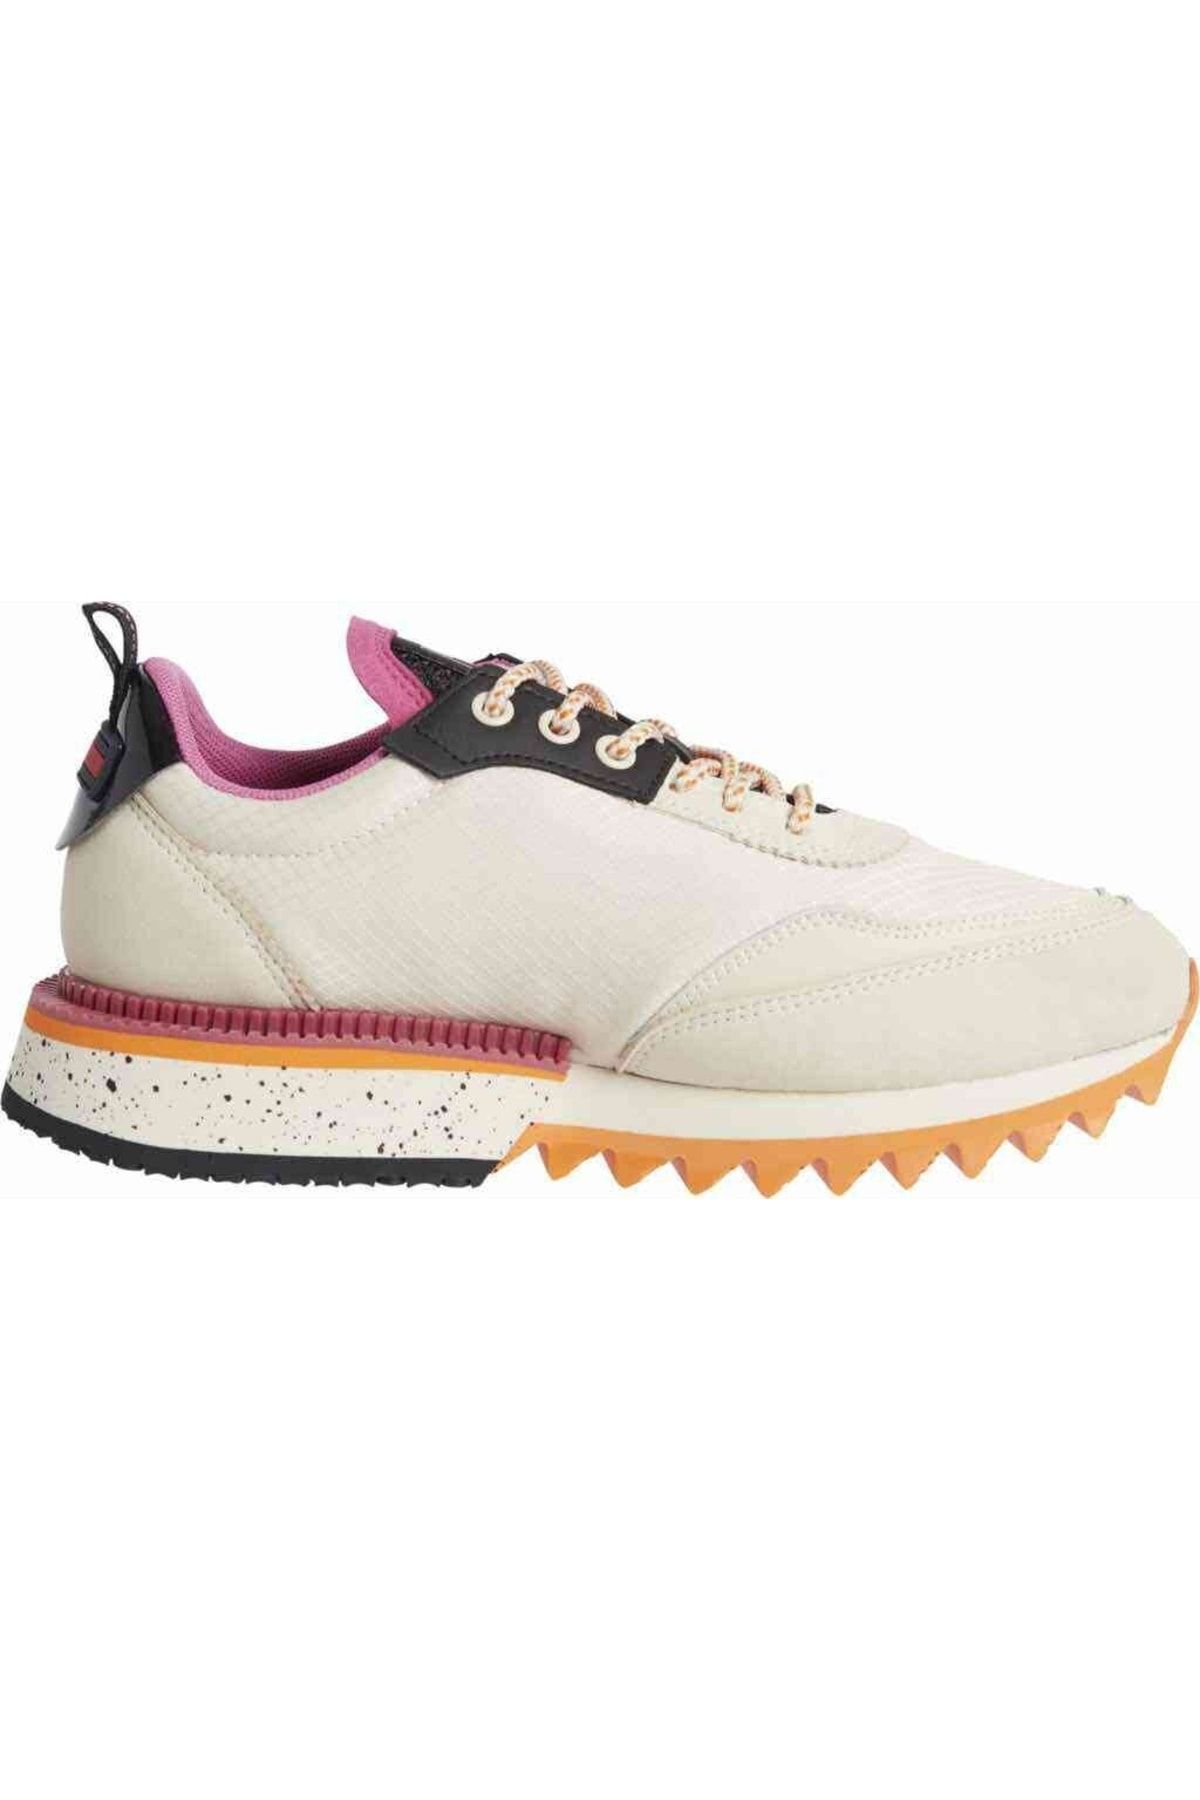 Tommy Hilfiger Wmns The Cleat Sneaker